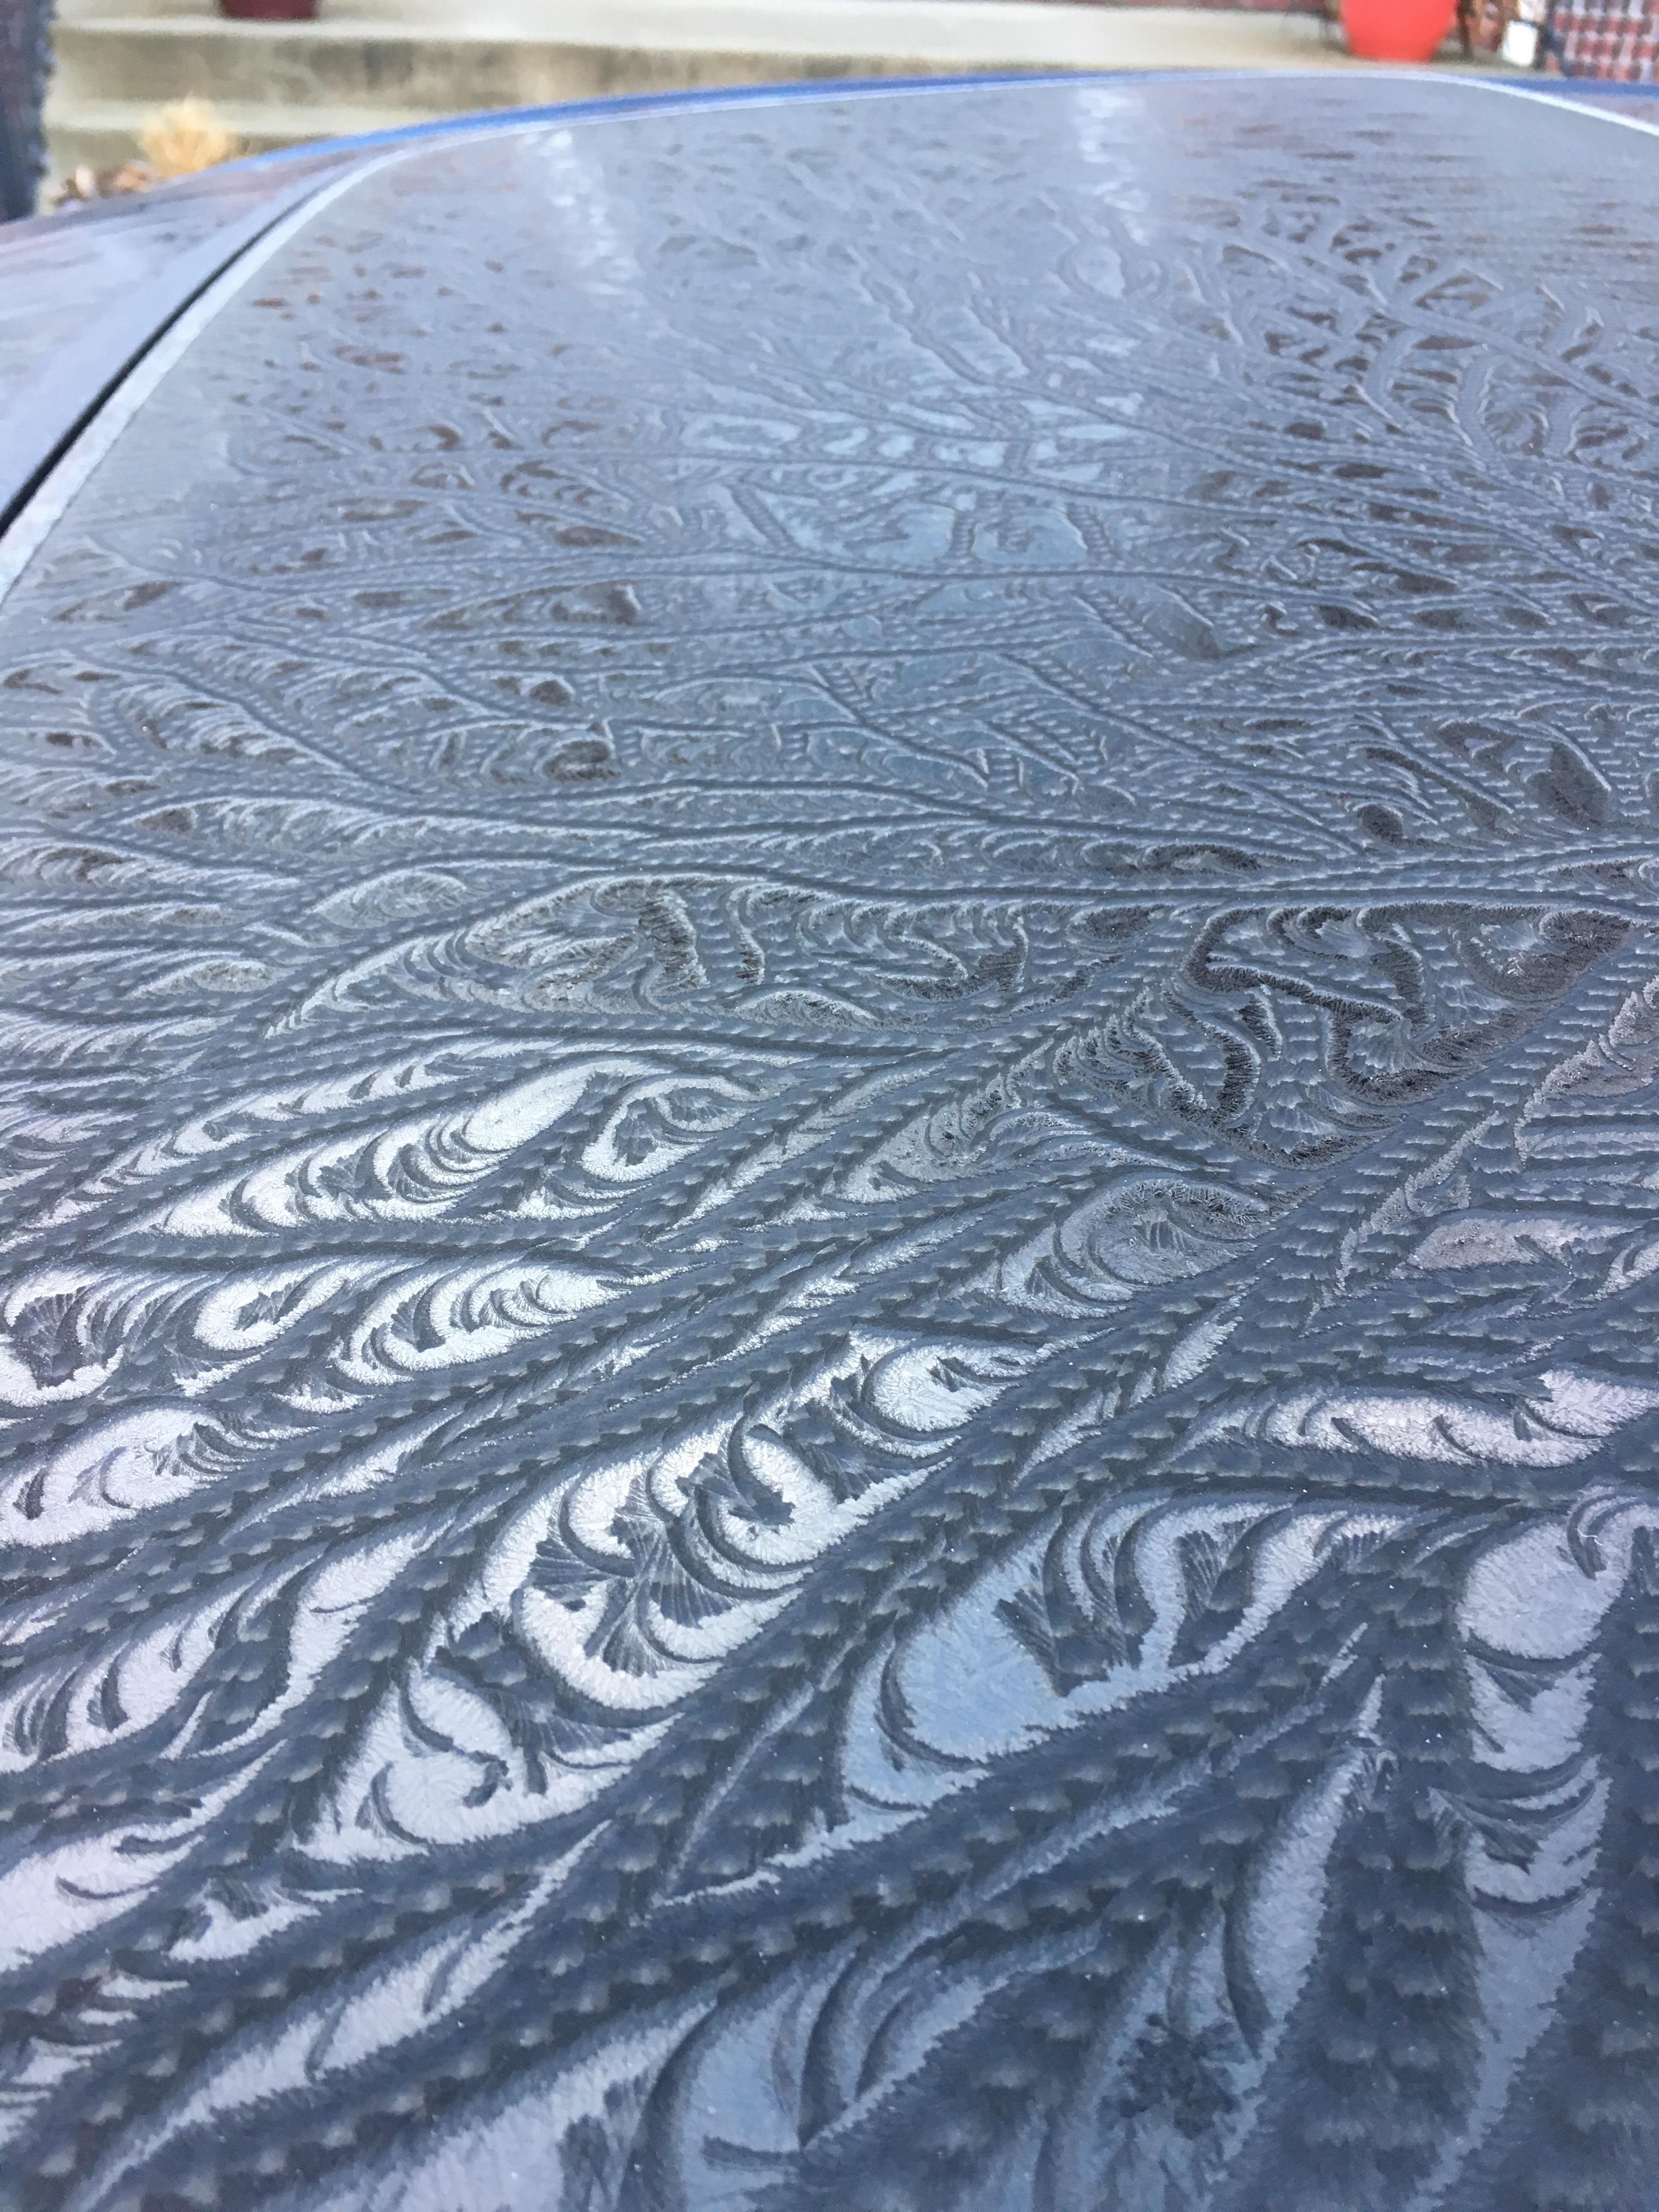 memes - picture of ice on a car